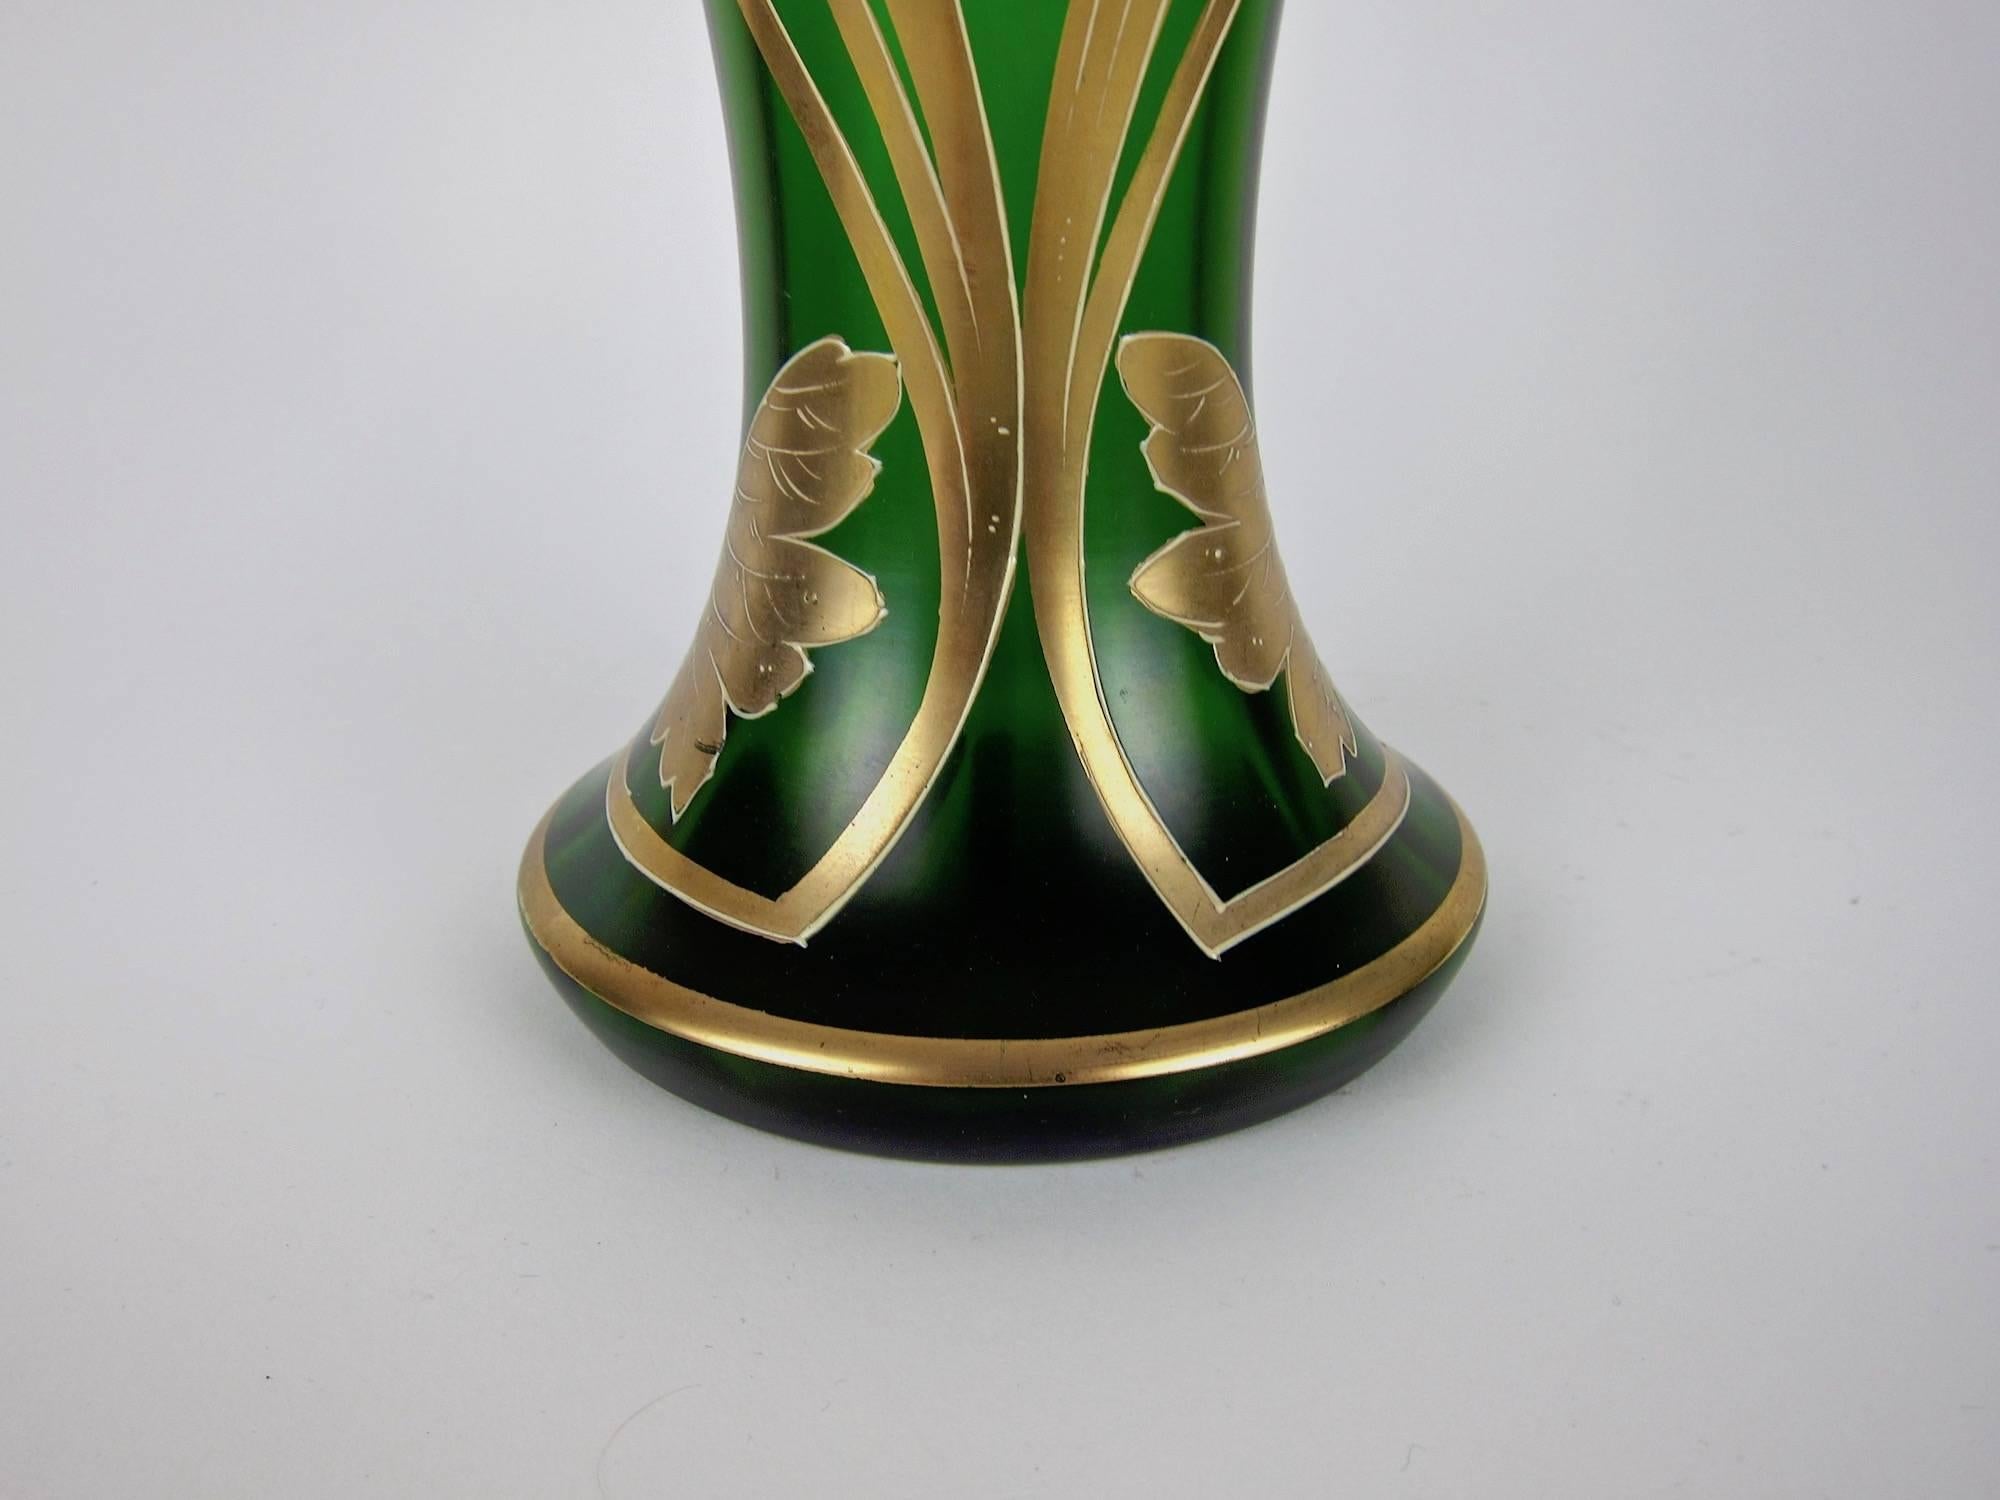 20th Century Antique Jeweled and Enameled Secessionist Green and Gold Glass Vase 